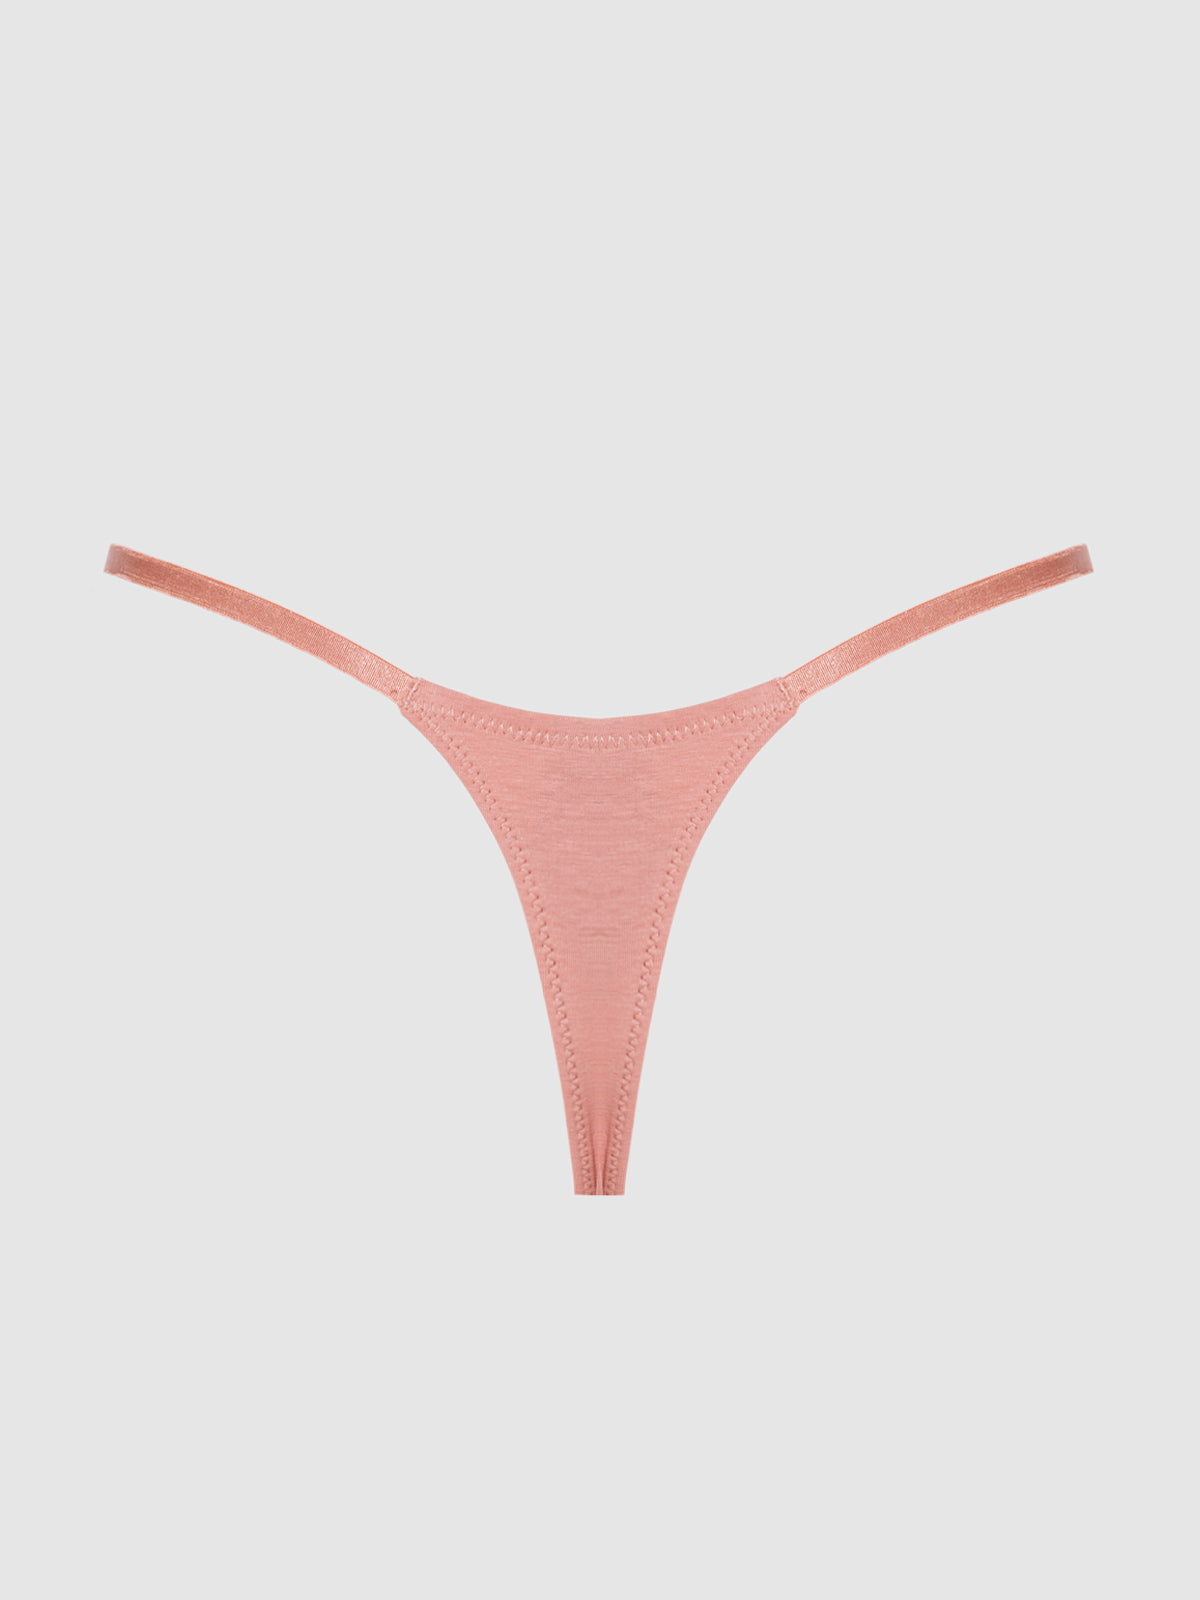 Bailey Stretch Cotton Thong - Brick Dust